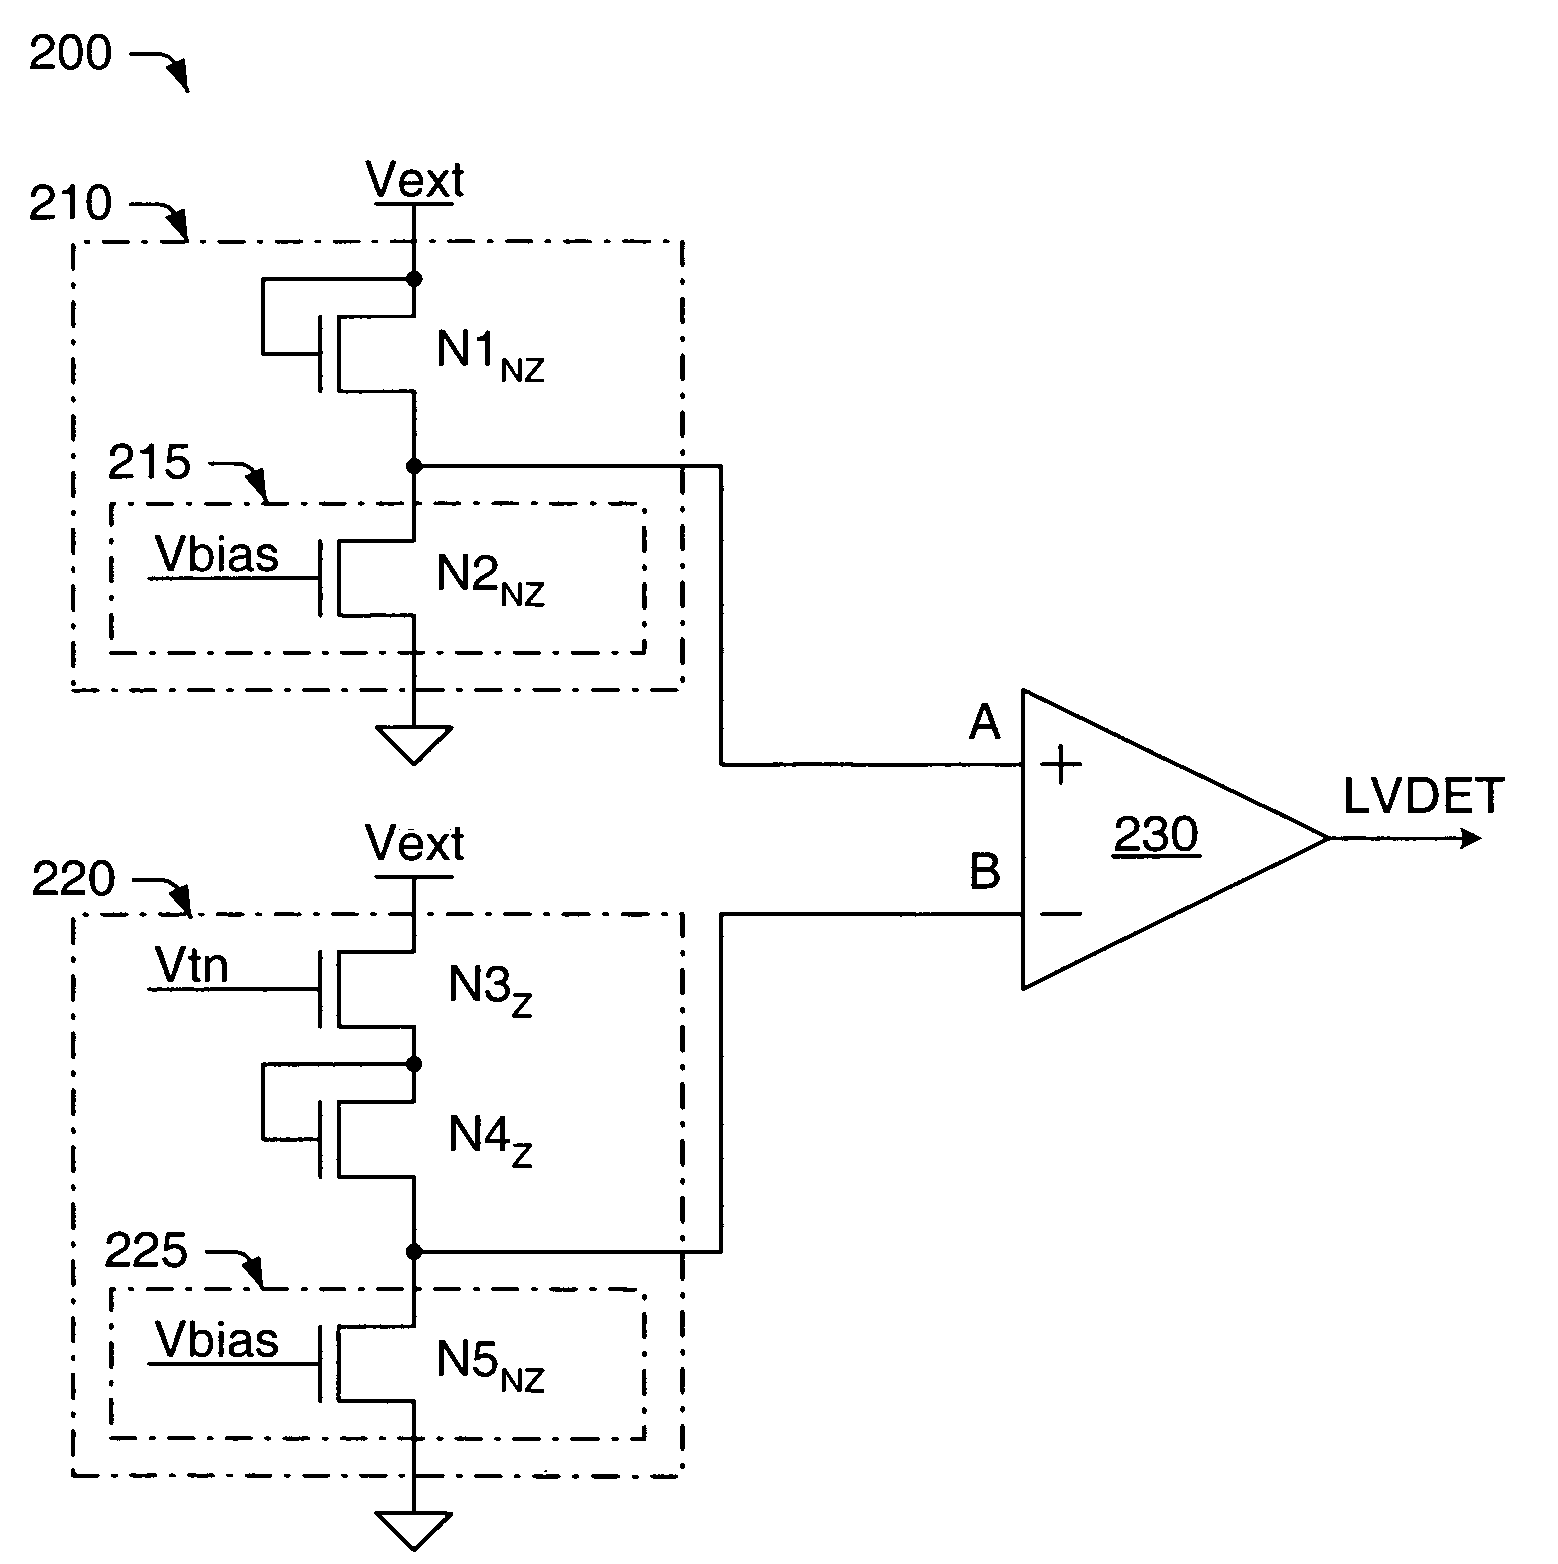 Resistor-less accurate low voltage detect circuit and method for detecting a low voltage condition